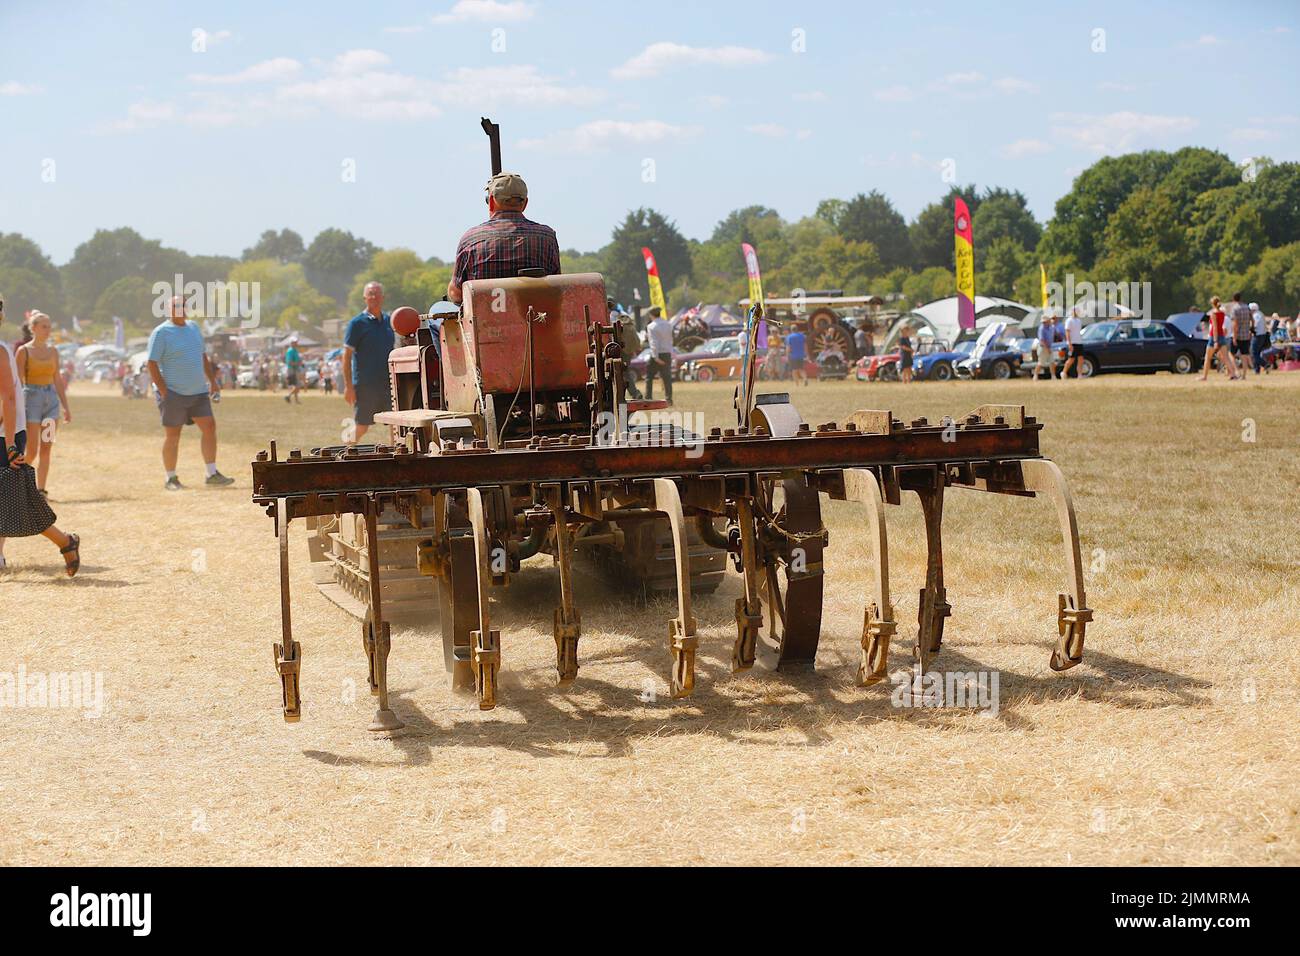 Woodchurch, Kent, UK. 07 August, 2022. On a hot and sunny day in the Kent countryside thousands of people arrive at one of the largest steam rally events in the south east. Photo Credit: Paul Lawrenson/Alamy Live News Stock Photo